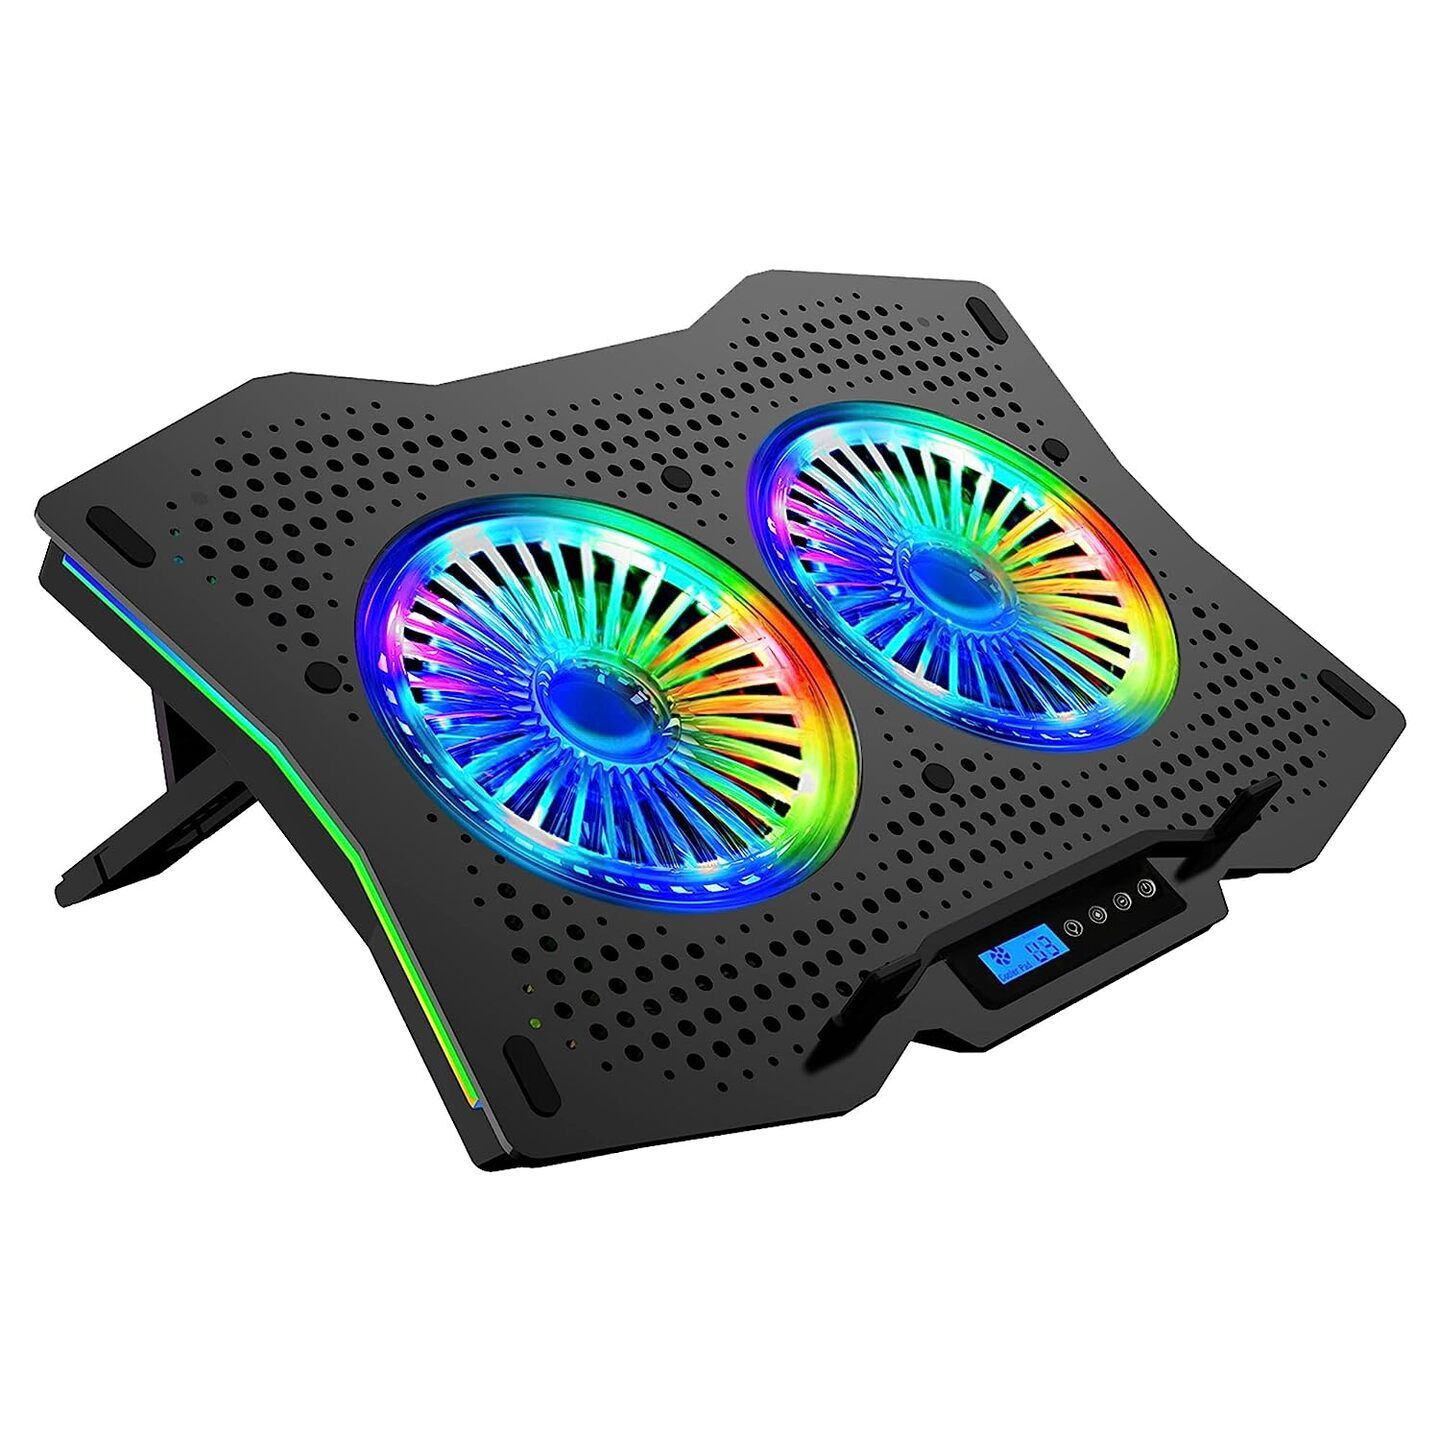 Zebronics NC9000 Laptop Cooling pad with fan speed and RGB lights controller